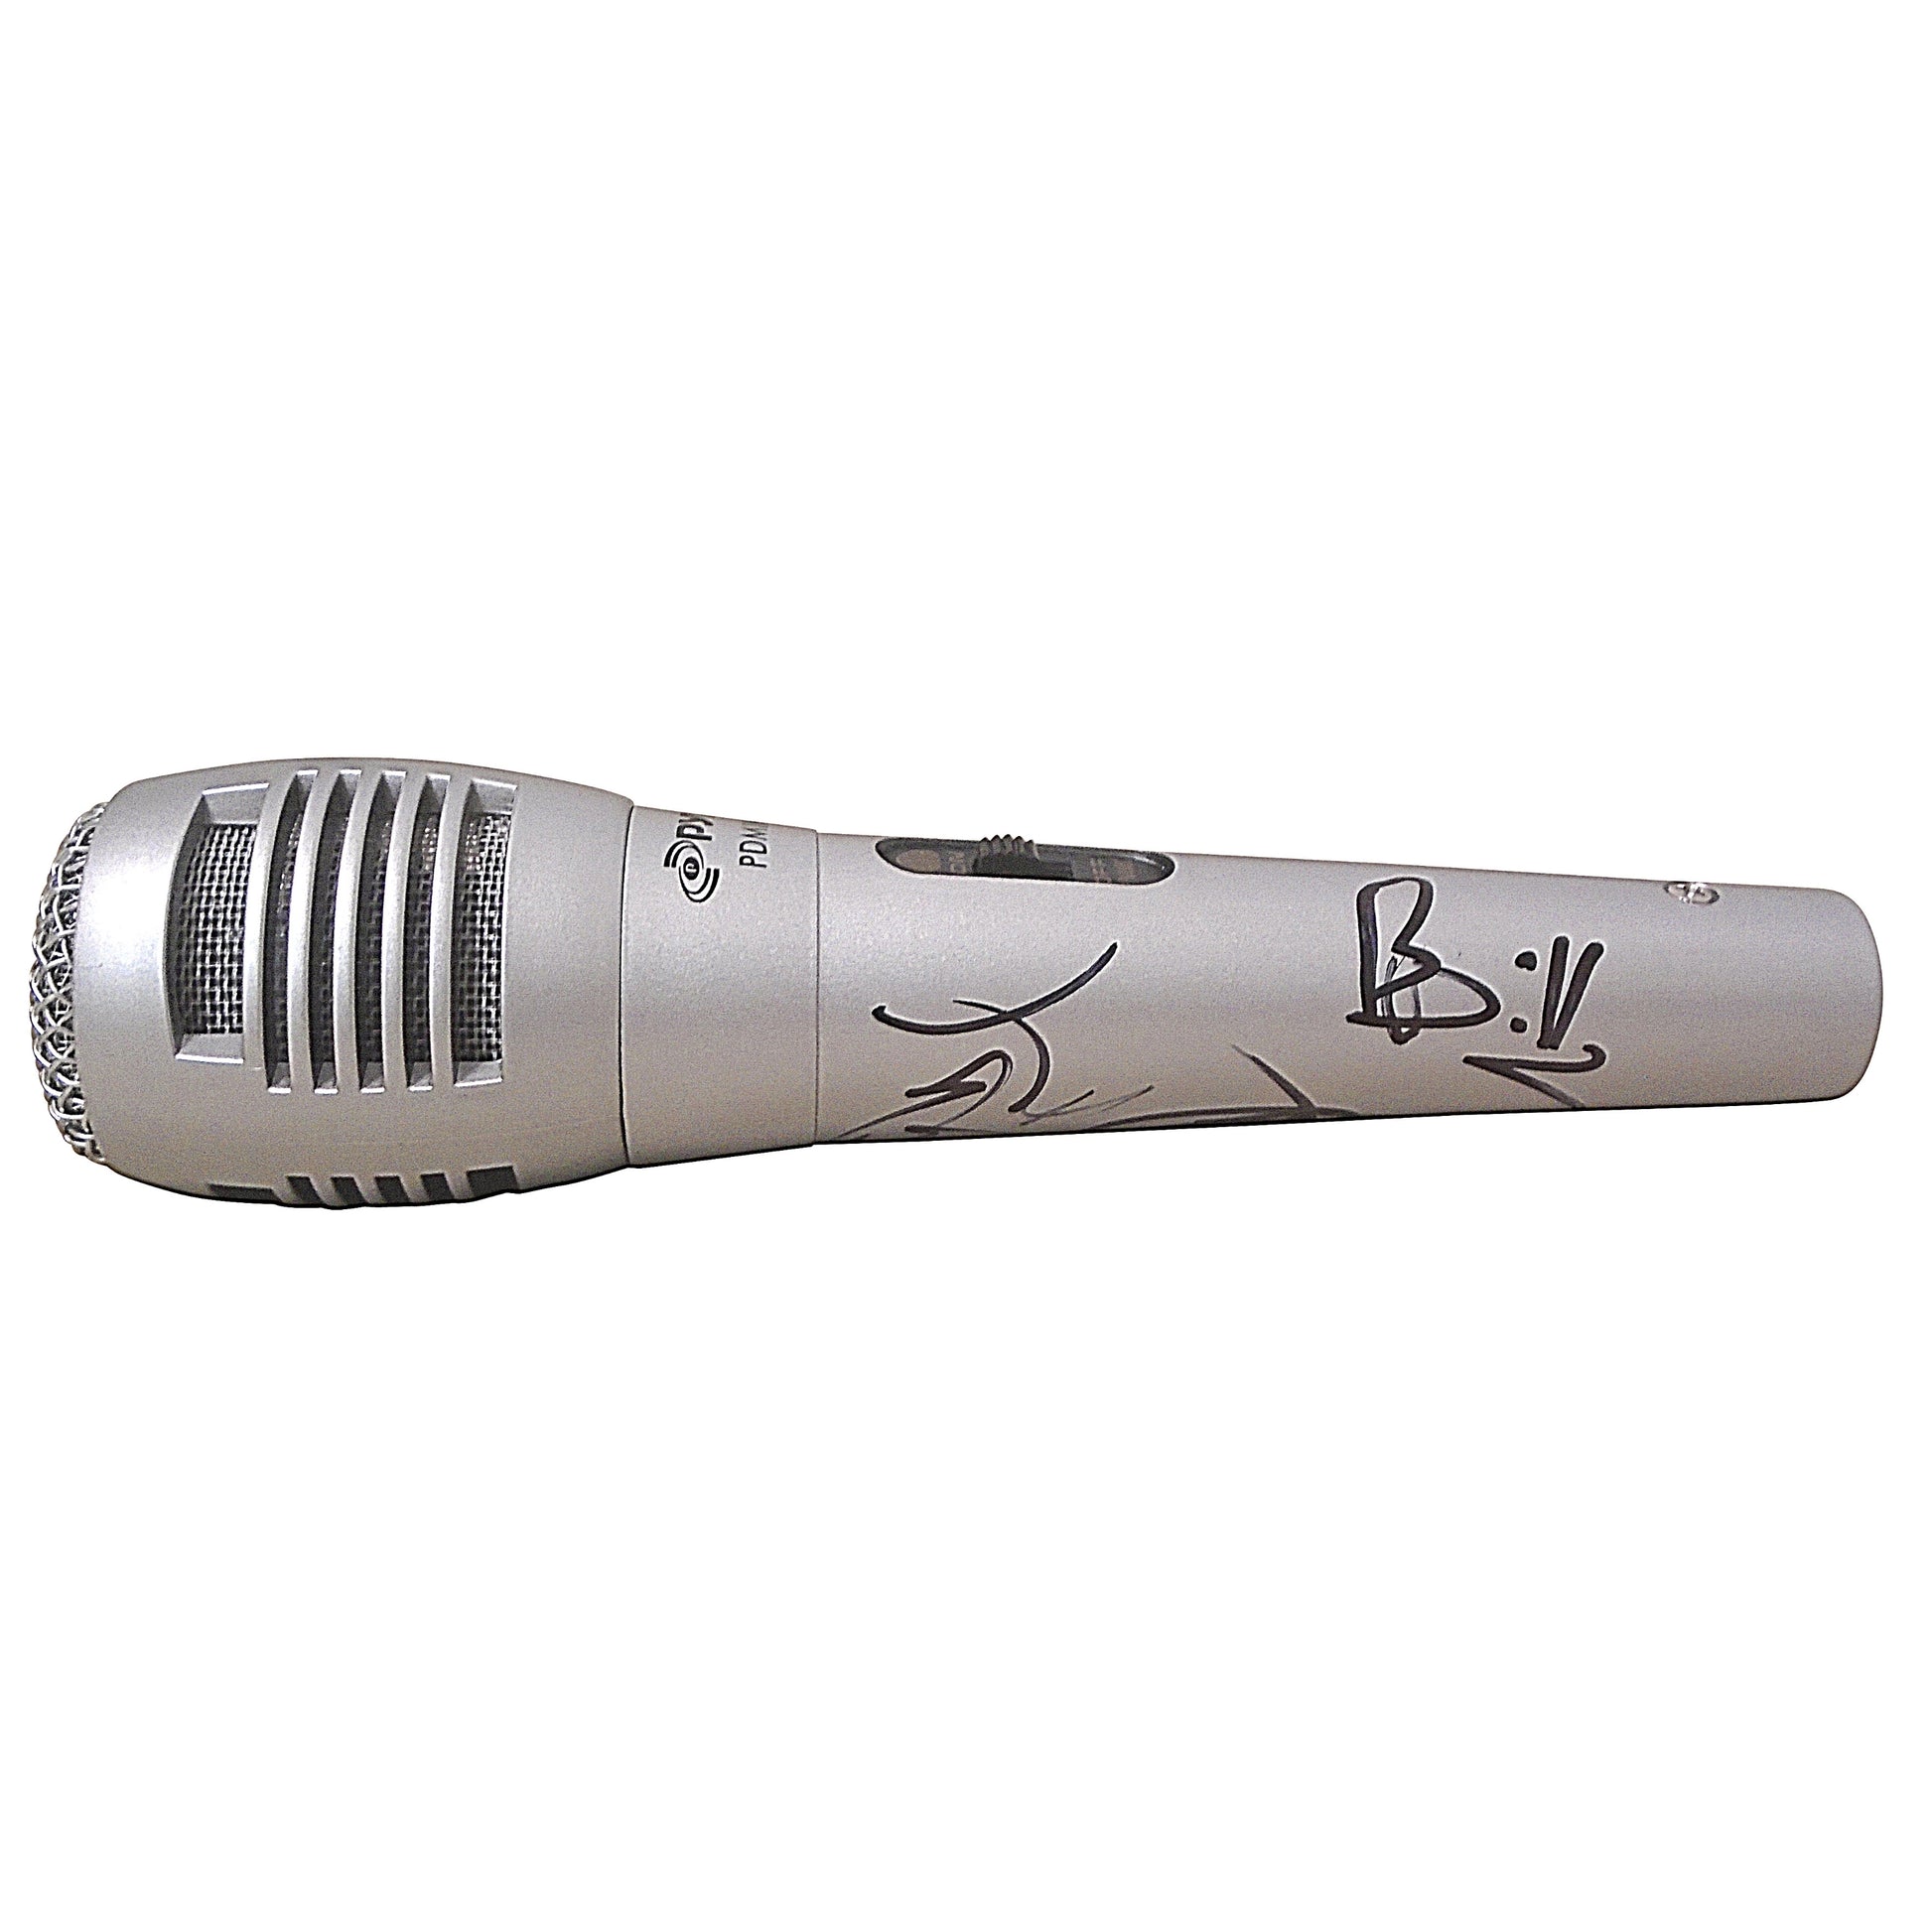 Music- Autographed- A Thousand Horses Signed Pyle Microphone Beckett BAS Authenticated 106